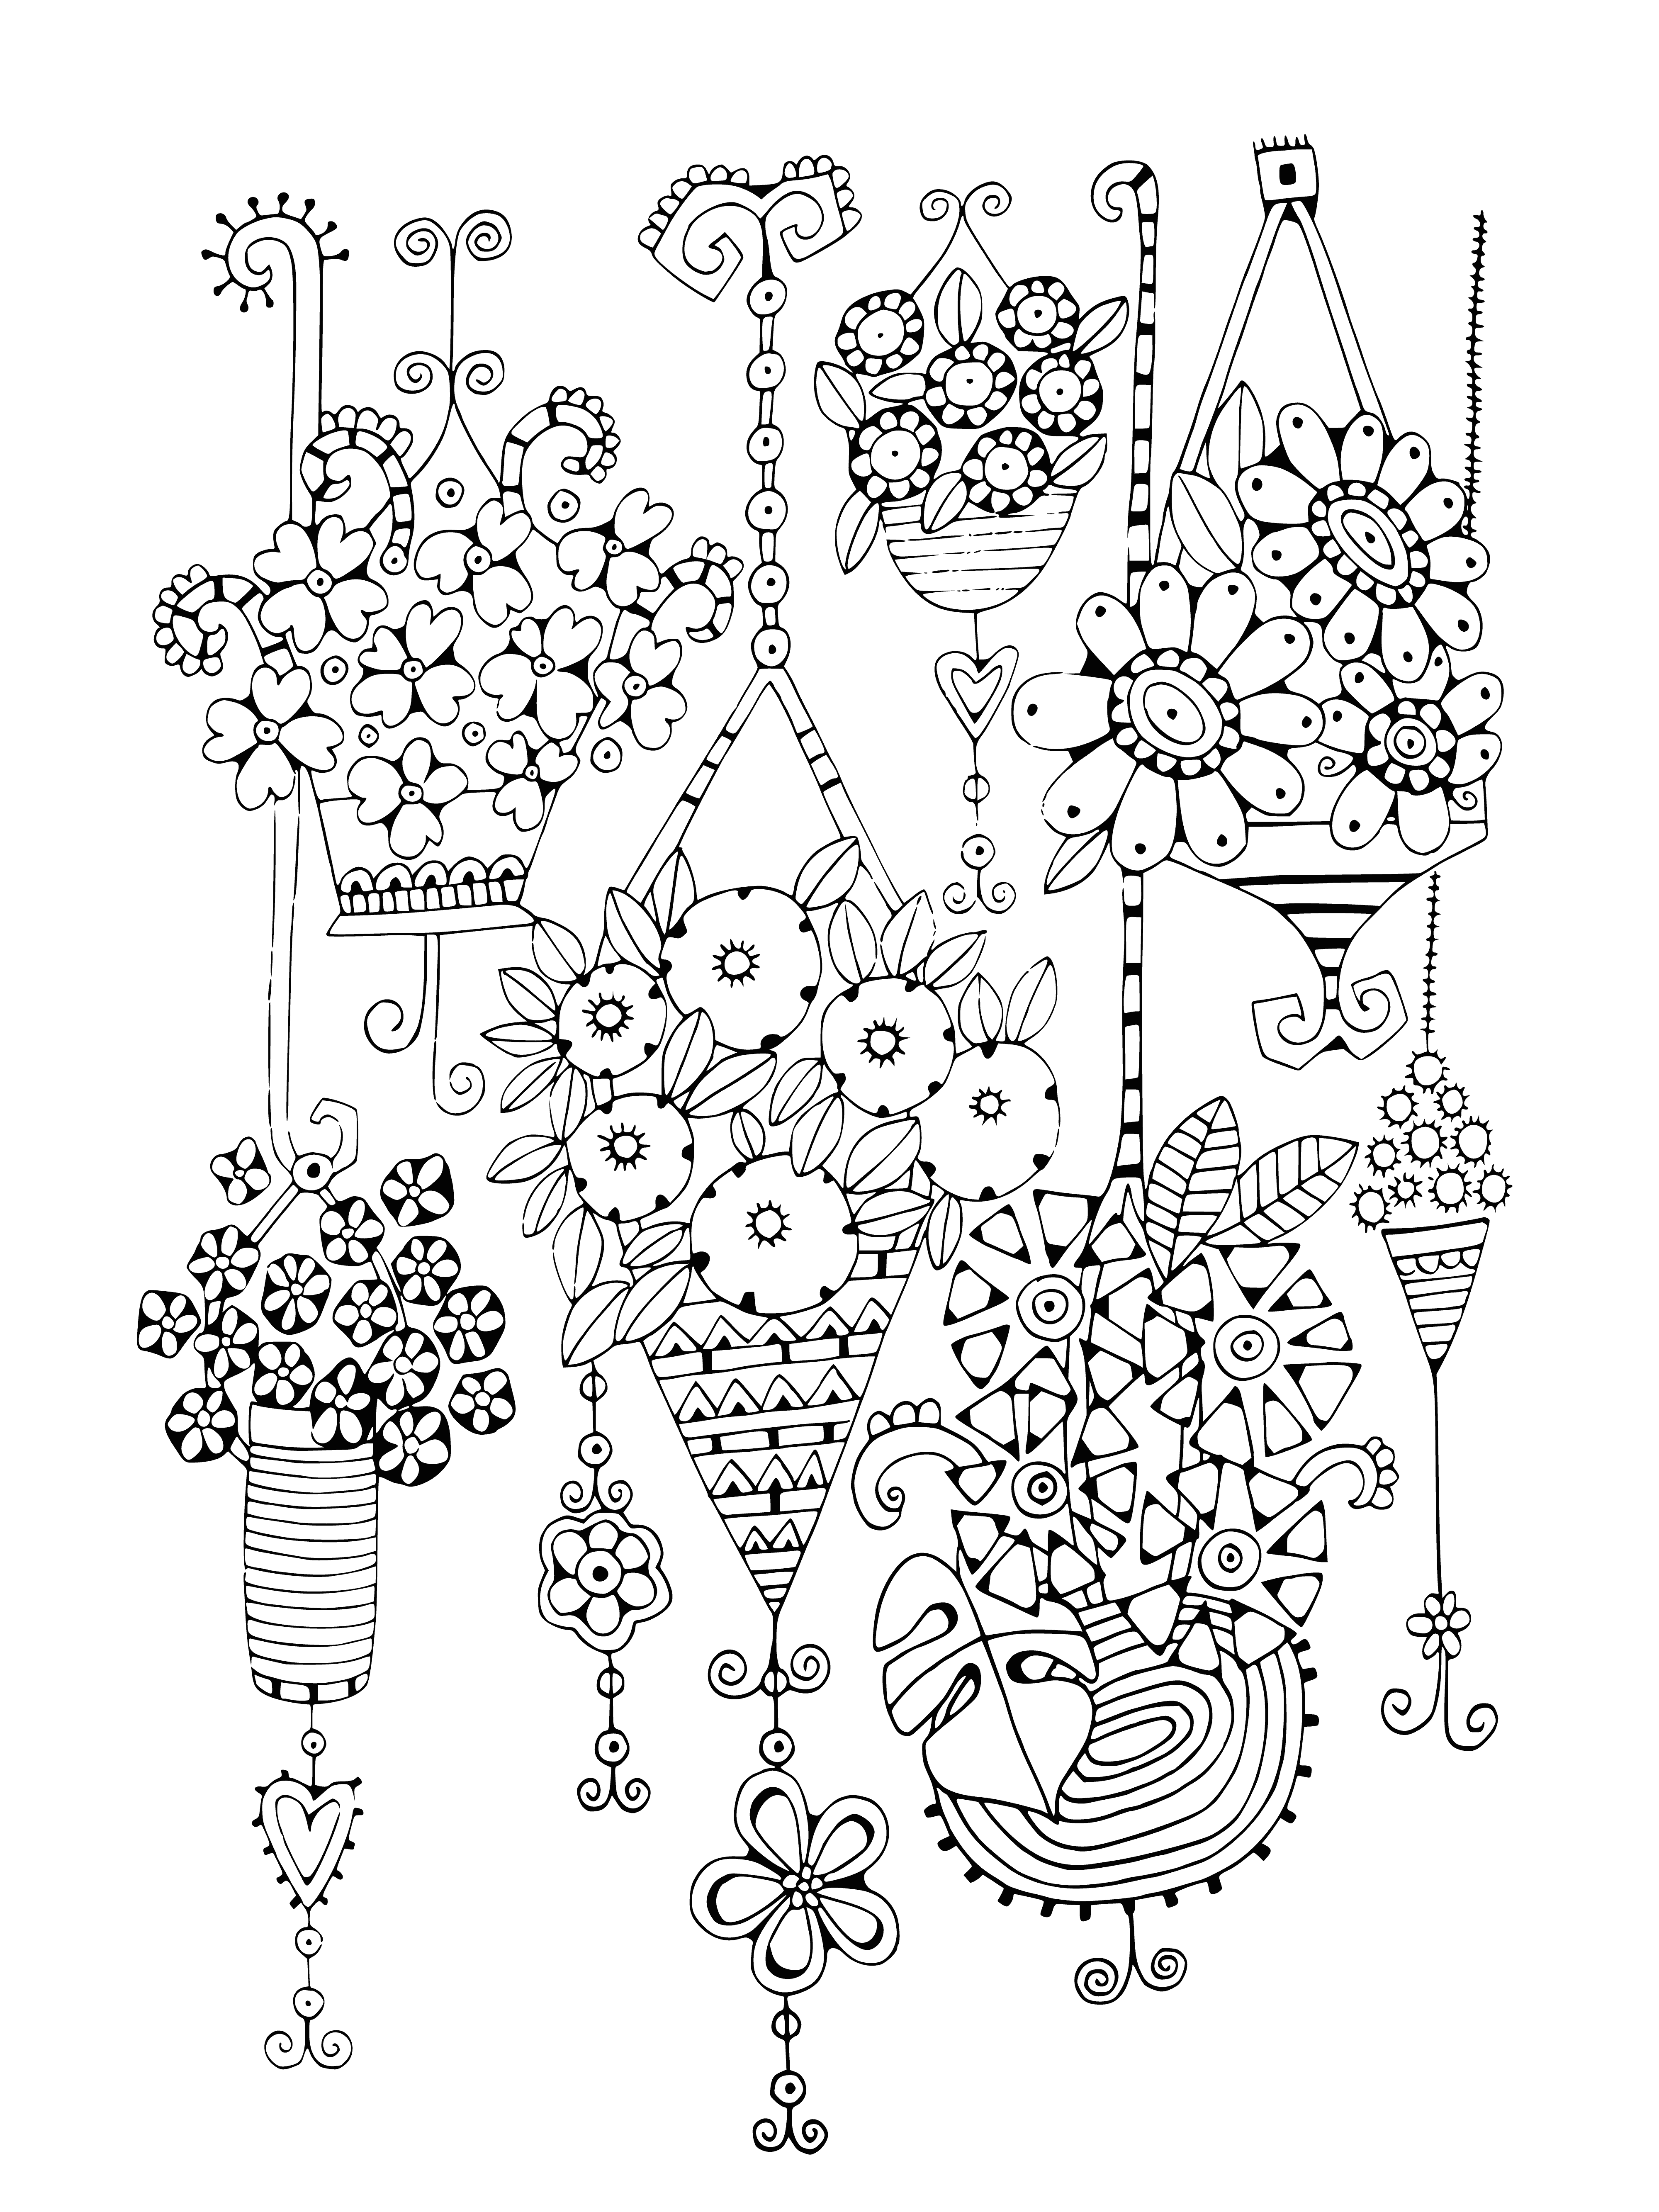 coloring page: 140 chars: Coloring page of flowers in pots and vases, some in bloom and some in bud. Leaves and stems winding around.